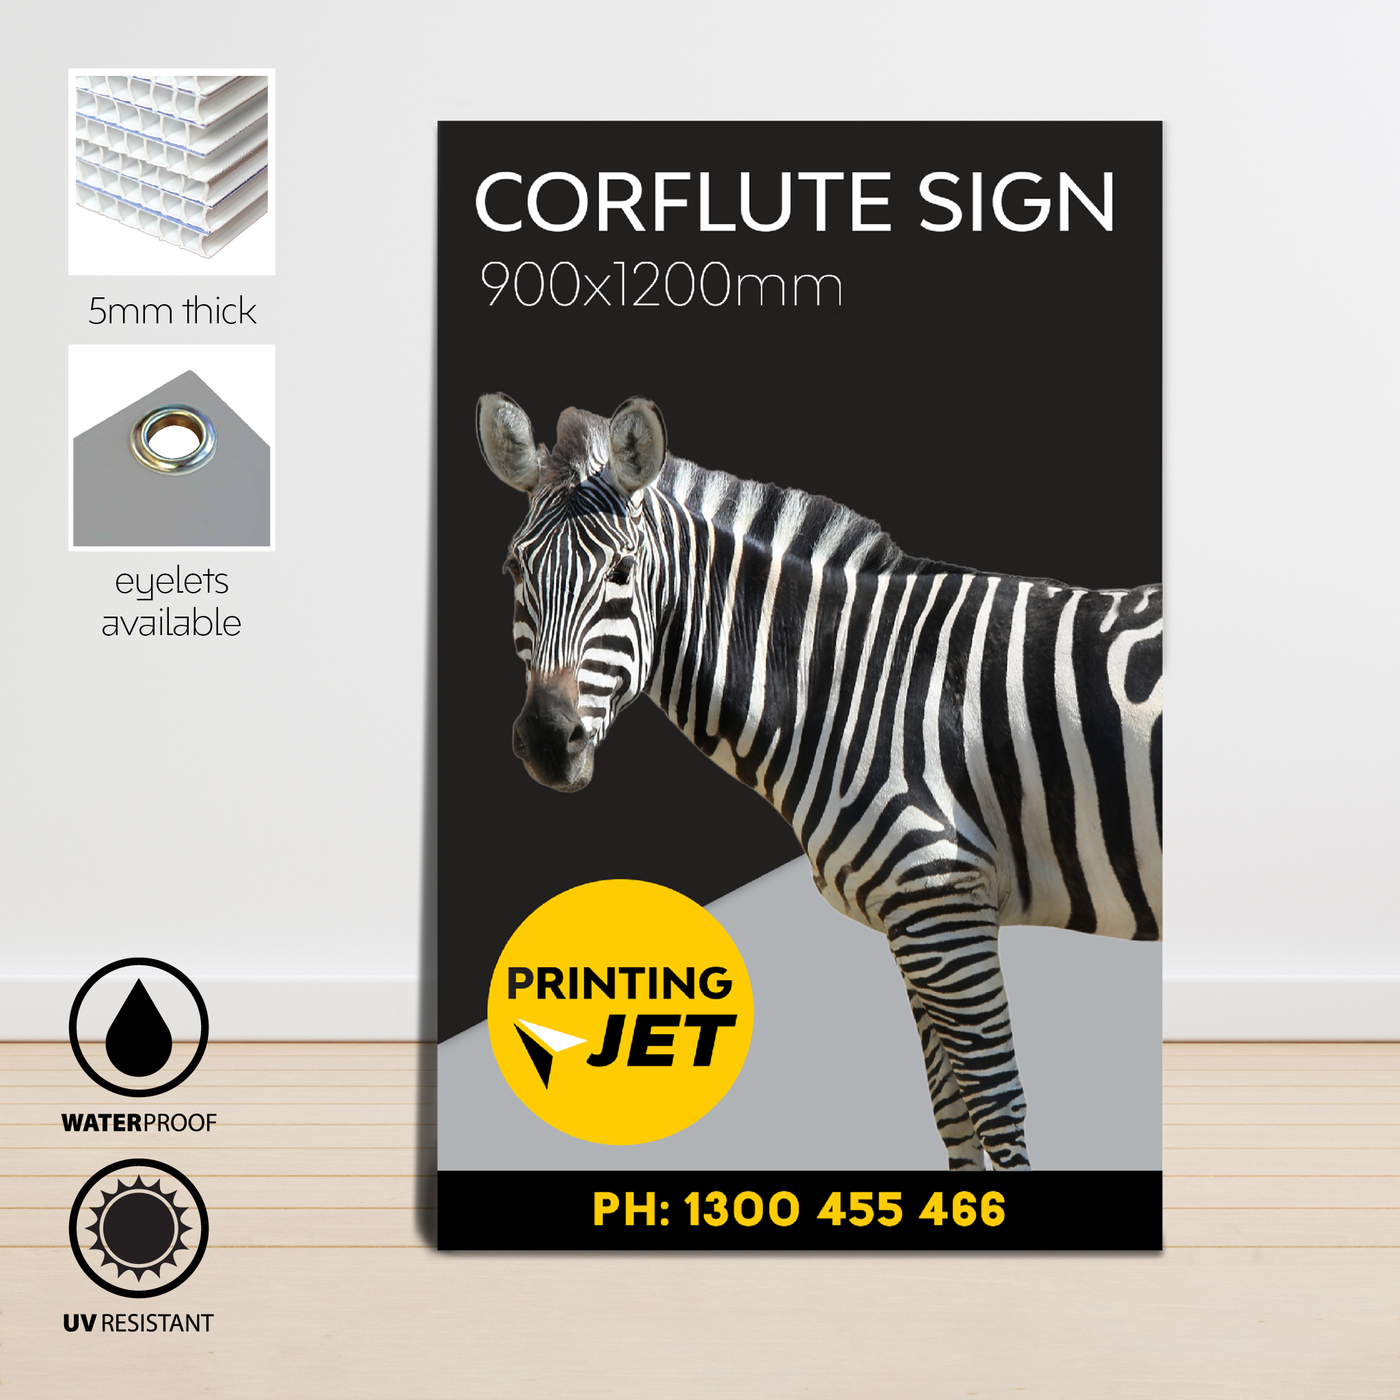 Corflute Signs appx 900x1200mm